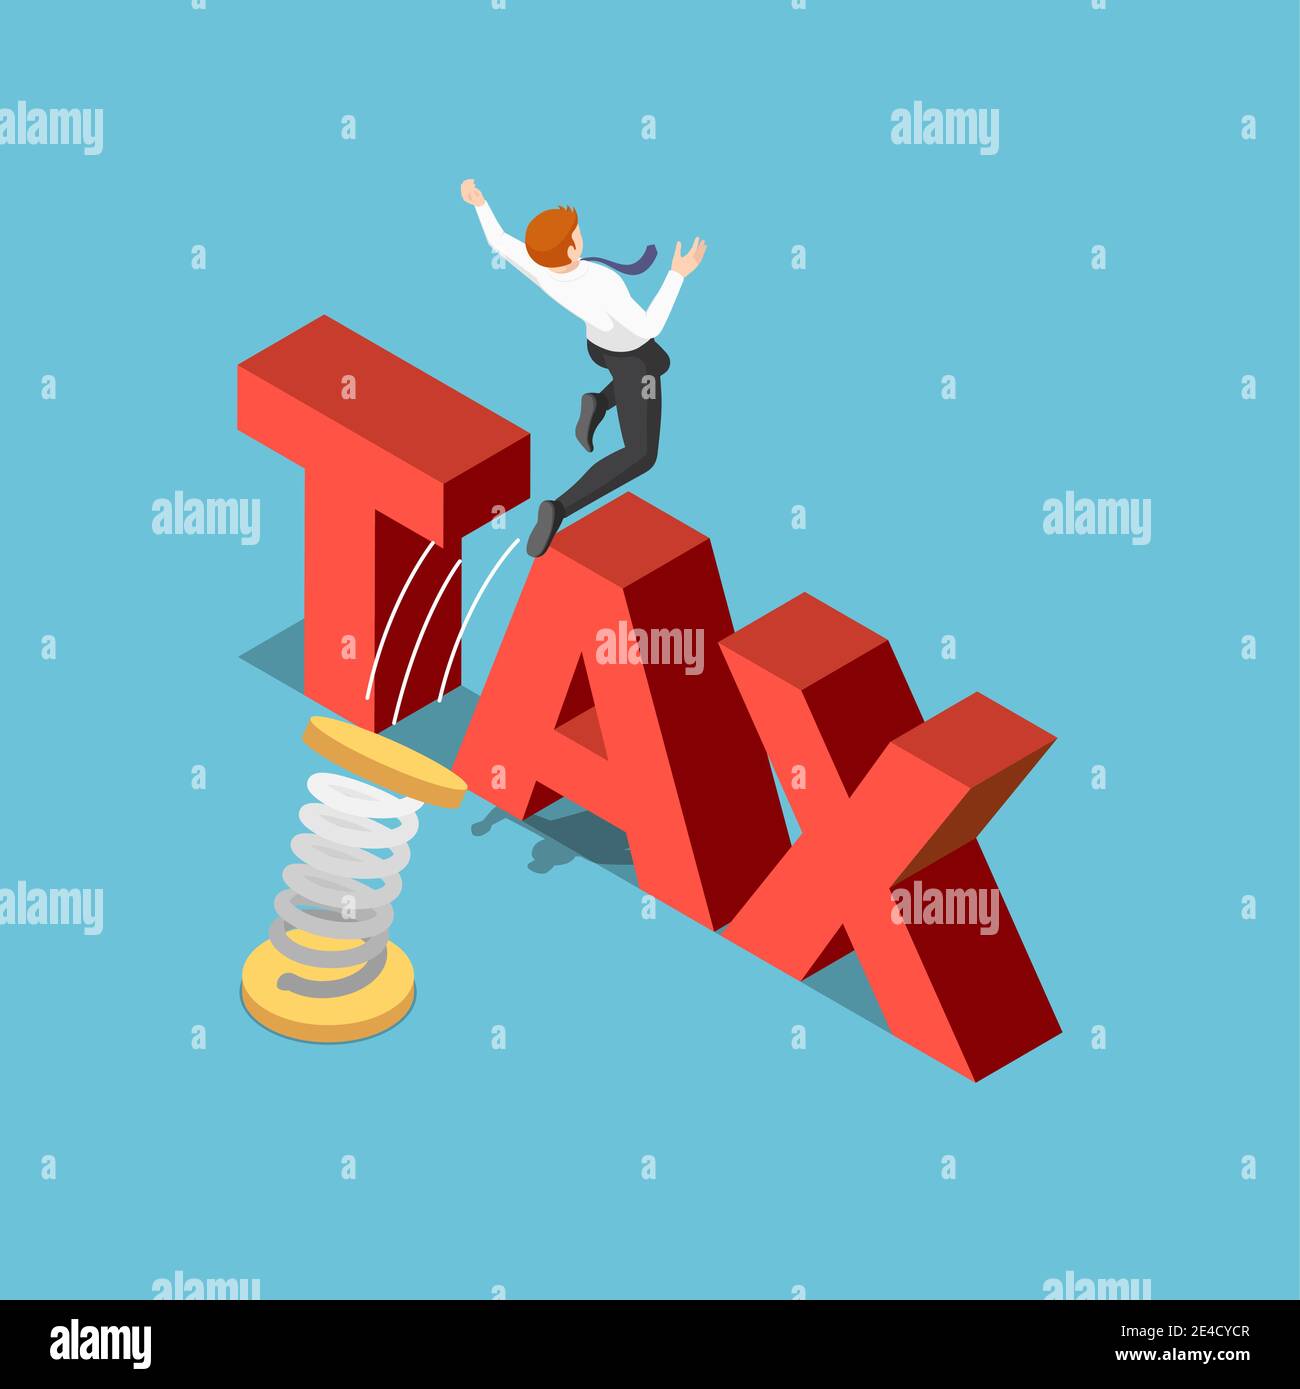 Flat 3d Isometric Businessman Use Spring to Jumping Over The TAX. Tax Management Concept. Stock Vector